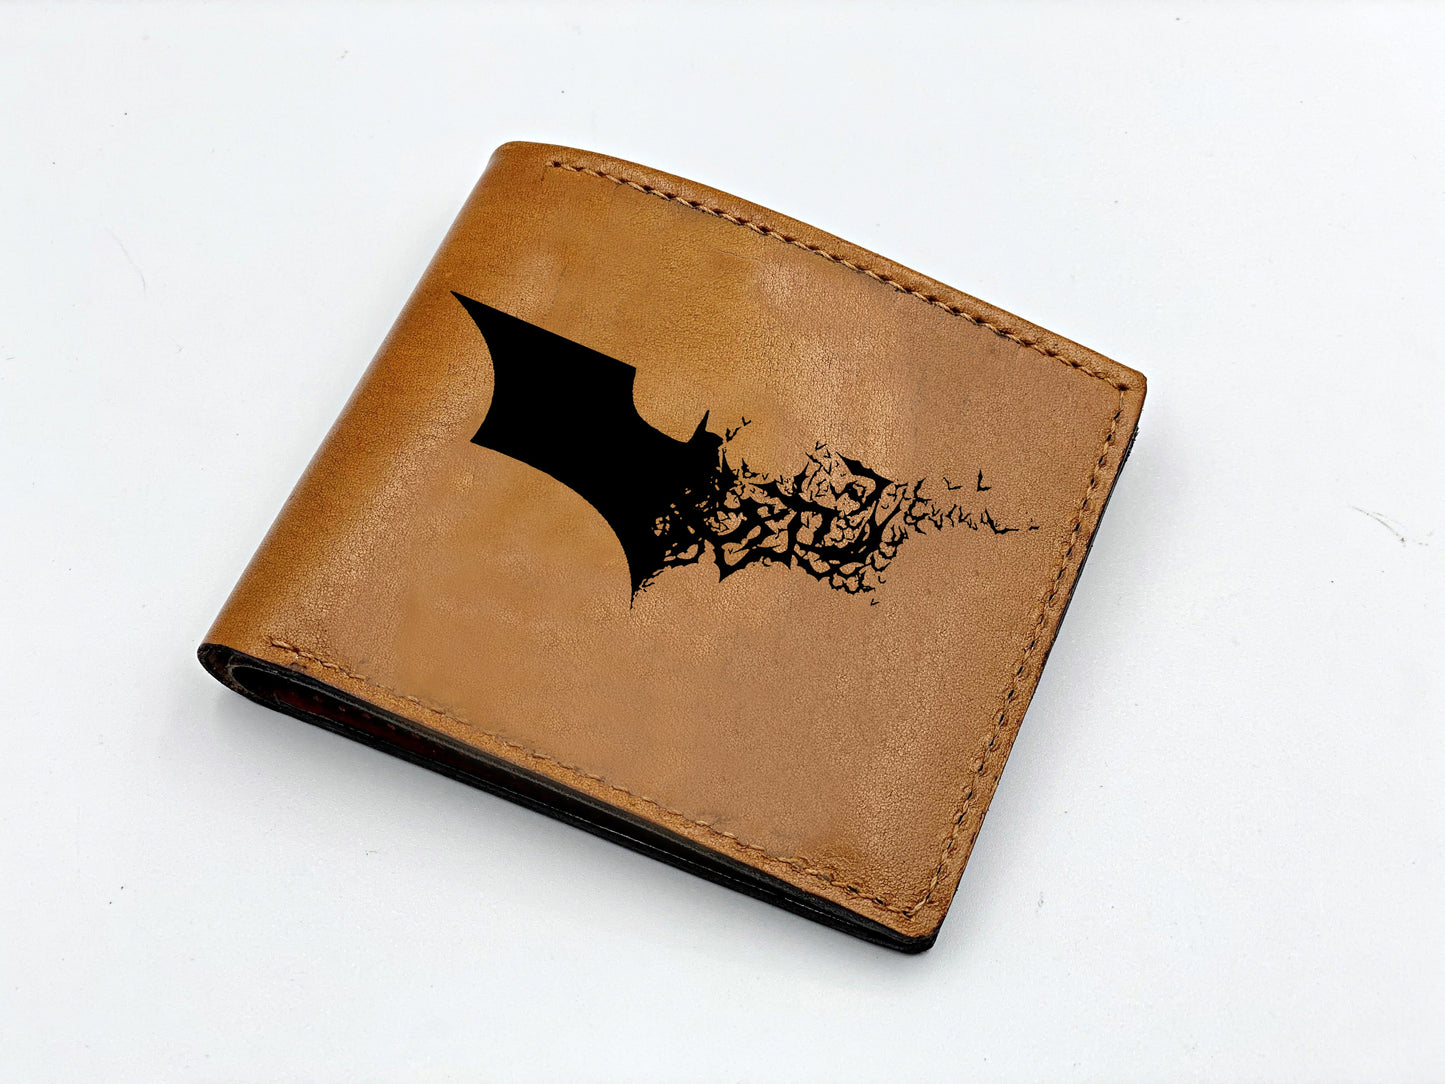 Mayan Corner - Custom batman leather wallet, engraving wallet with name initials, superheroes gift idea, special wedding present